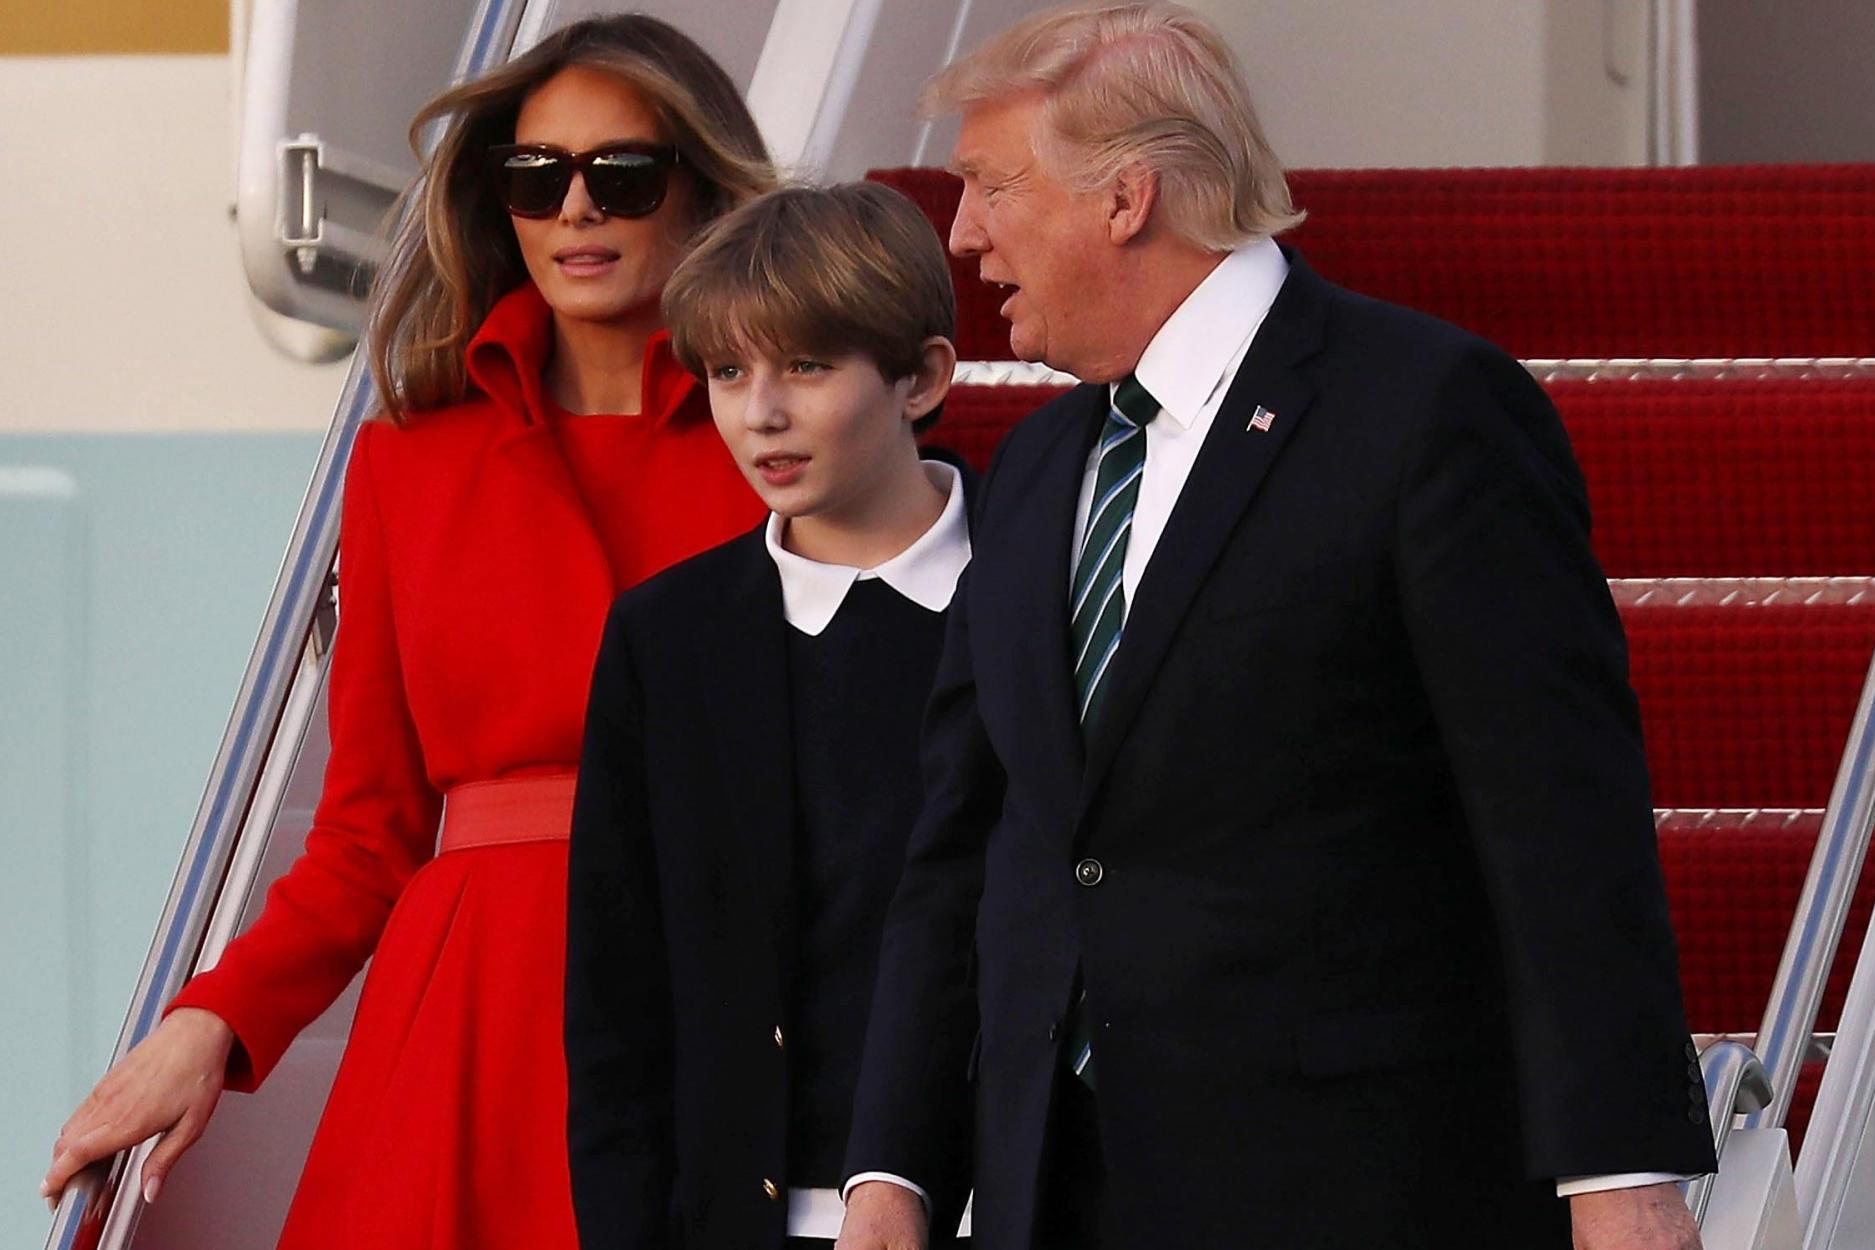 Picture: President Donald Trump, his wife Melania Trump and their son Barron Trump arrive together on Air Force One at the Palm Beach International Airport to spend part of the weekend at Mar-a-Lago resort on March 17, 2017/